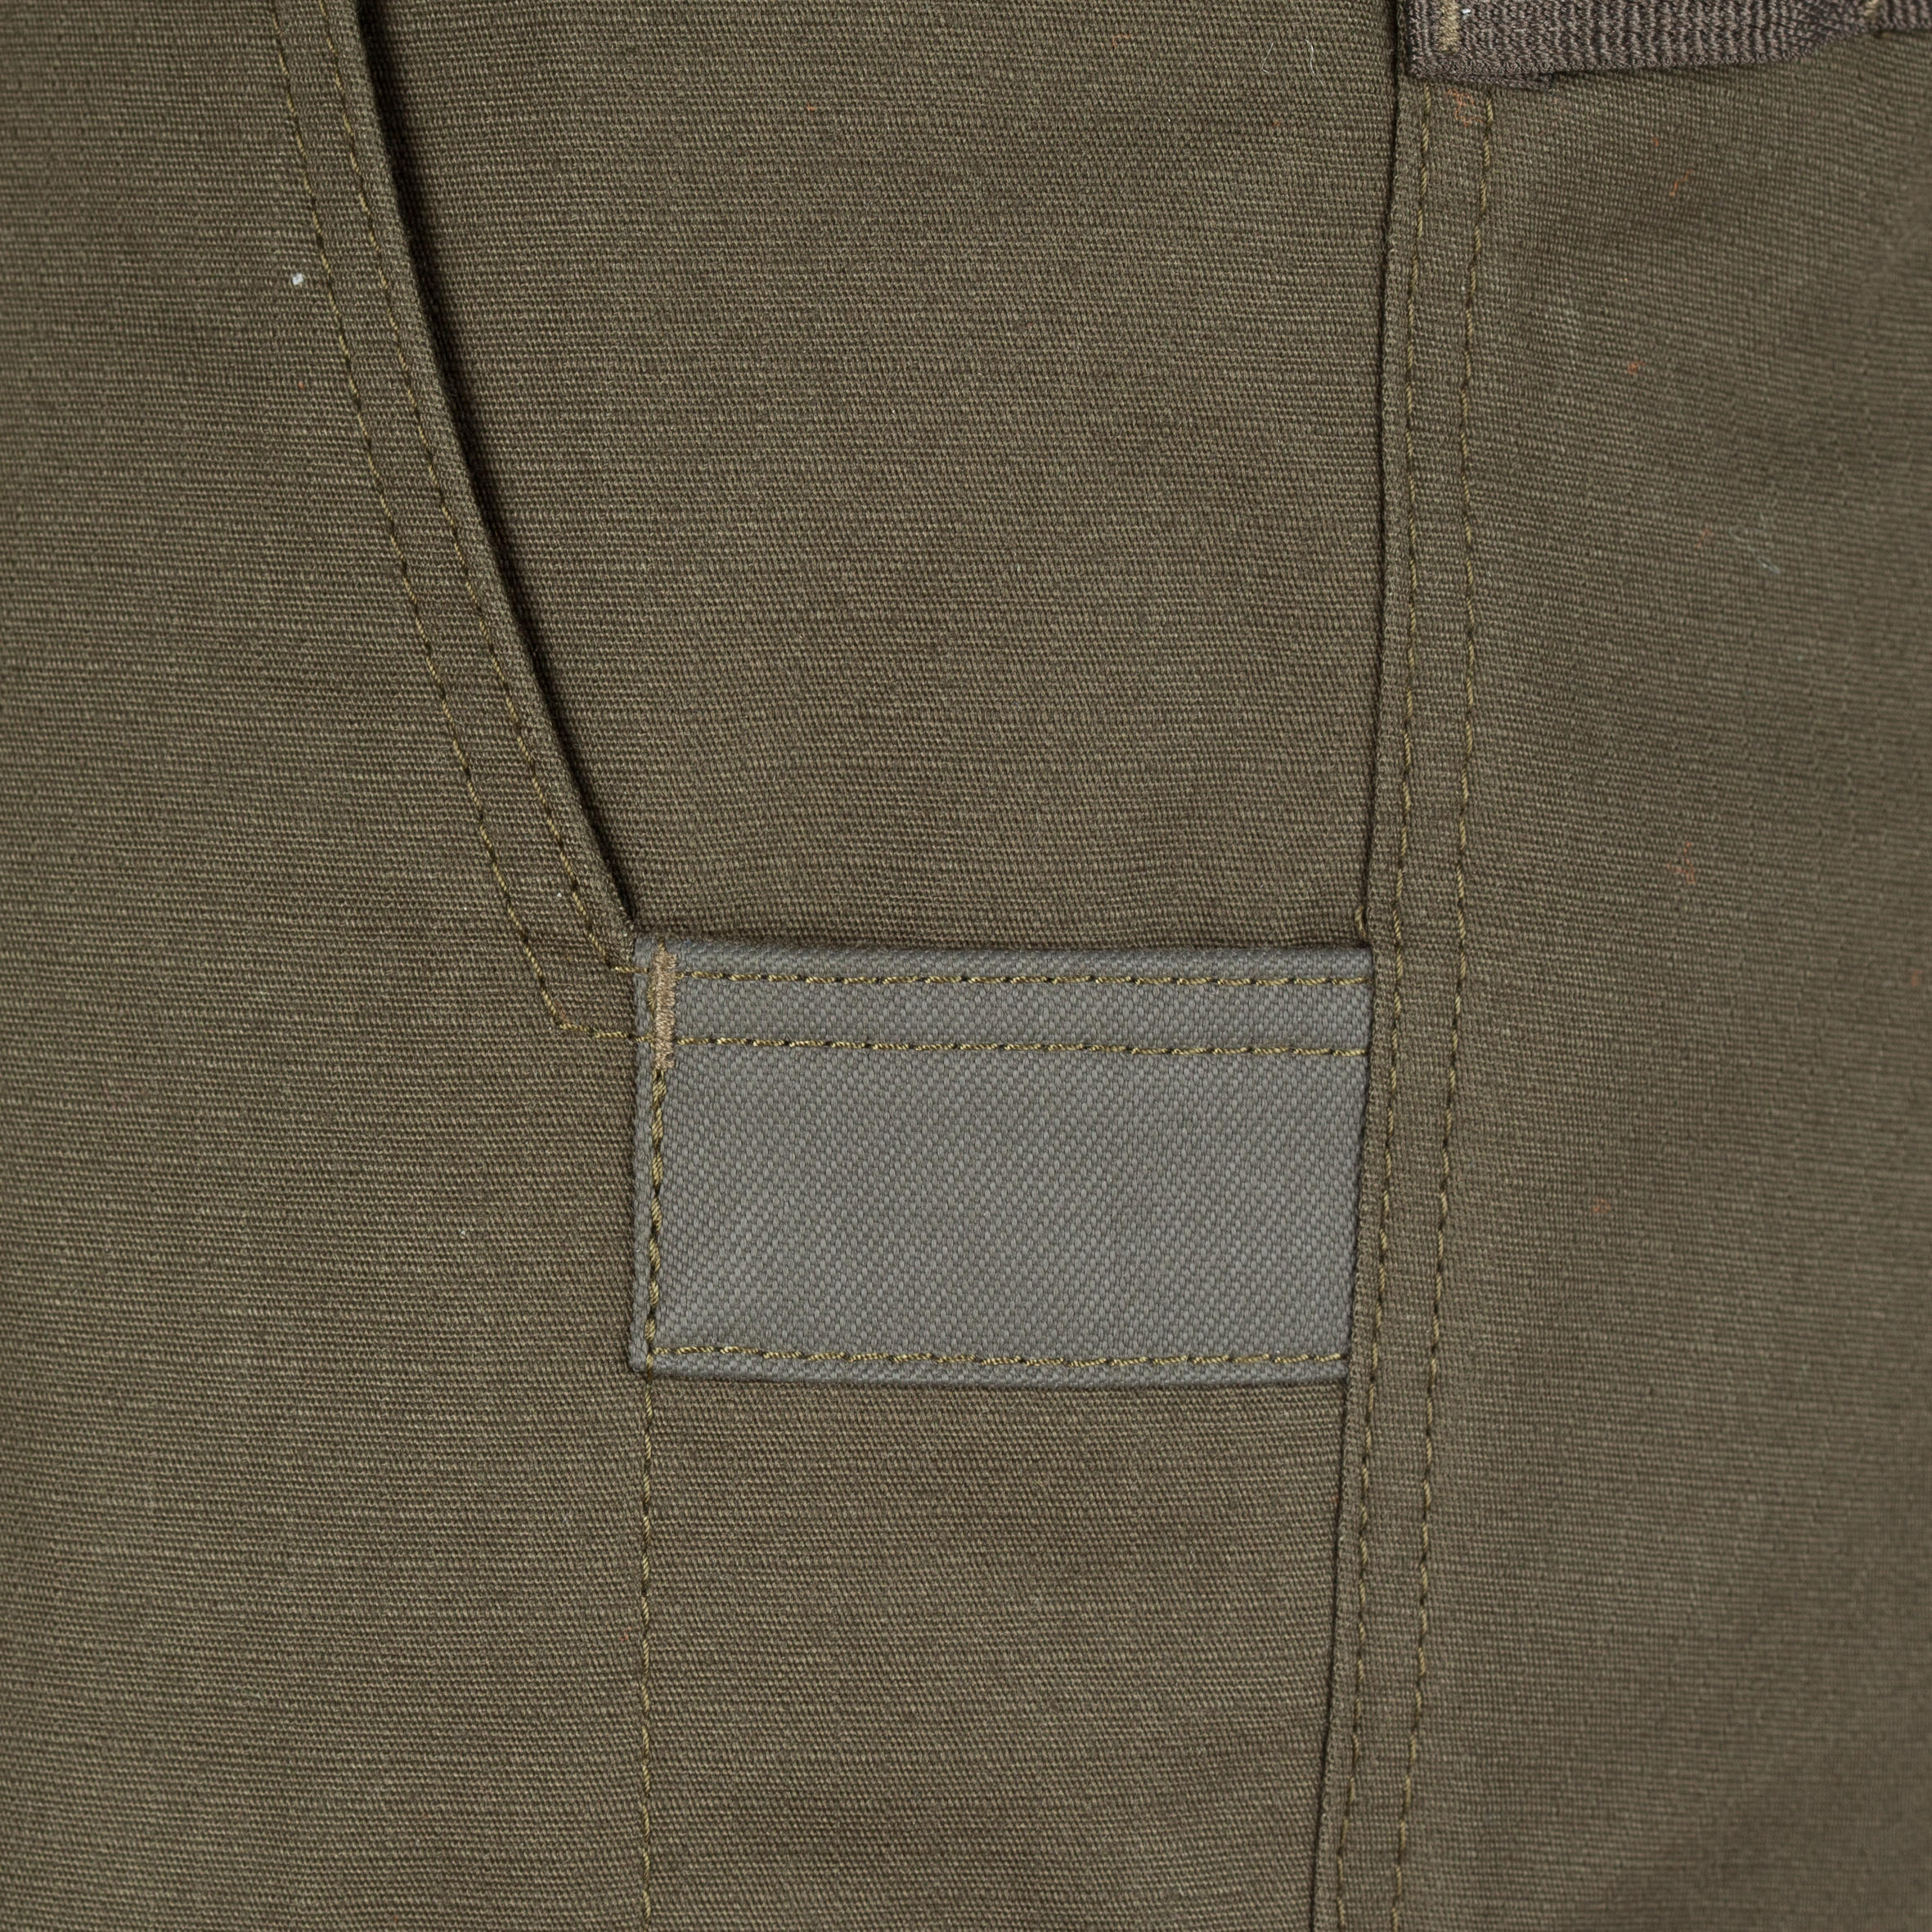 Durable Tear-Resistant Trousers - Green 5/5